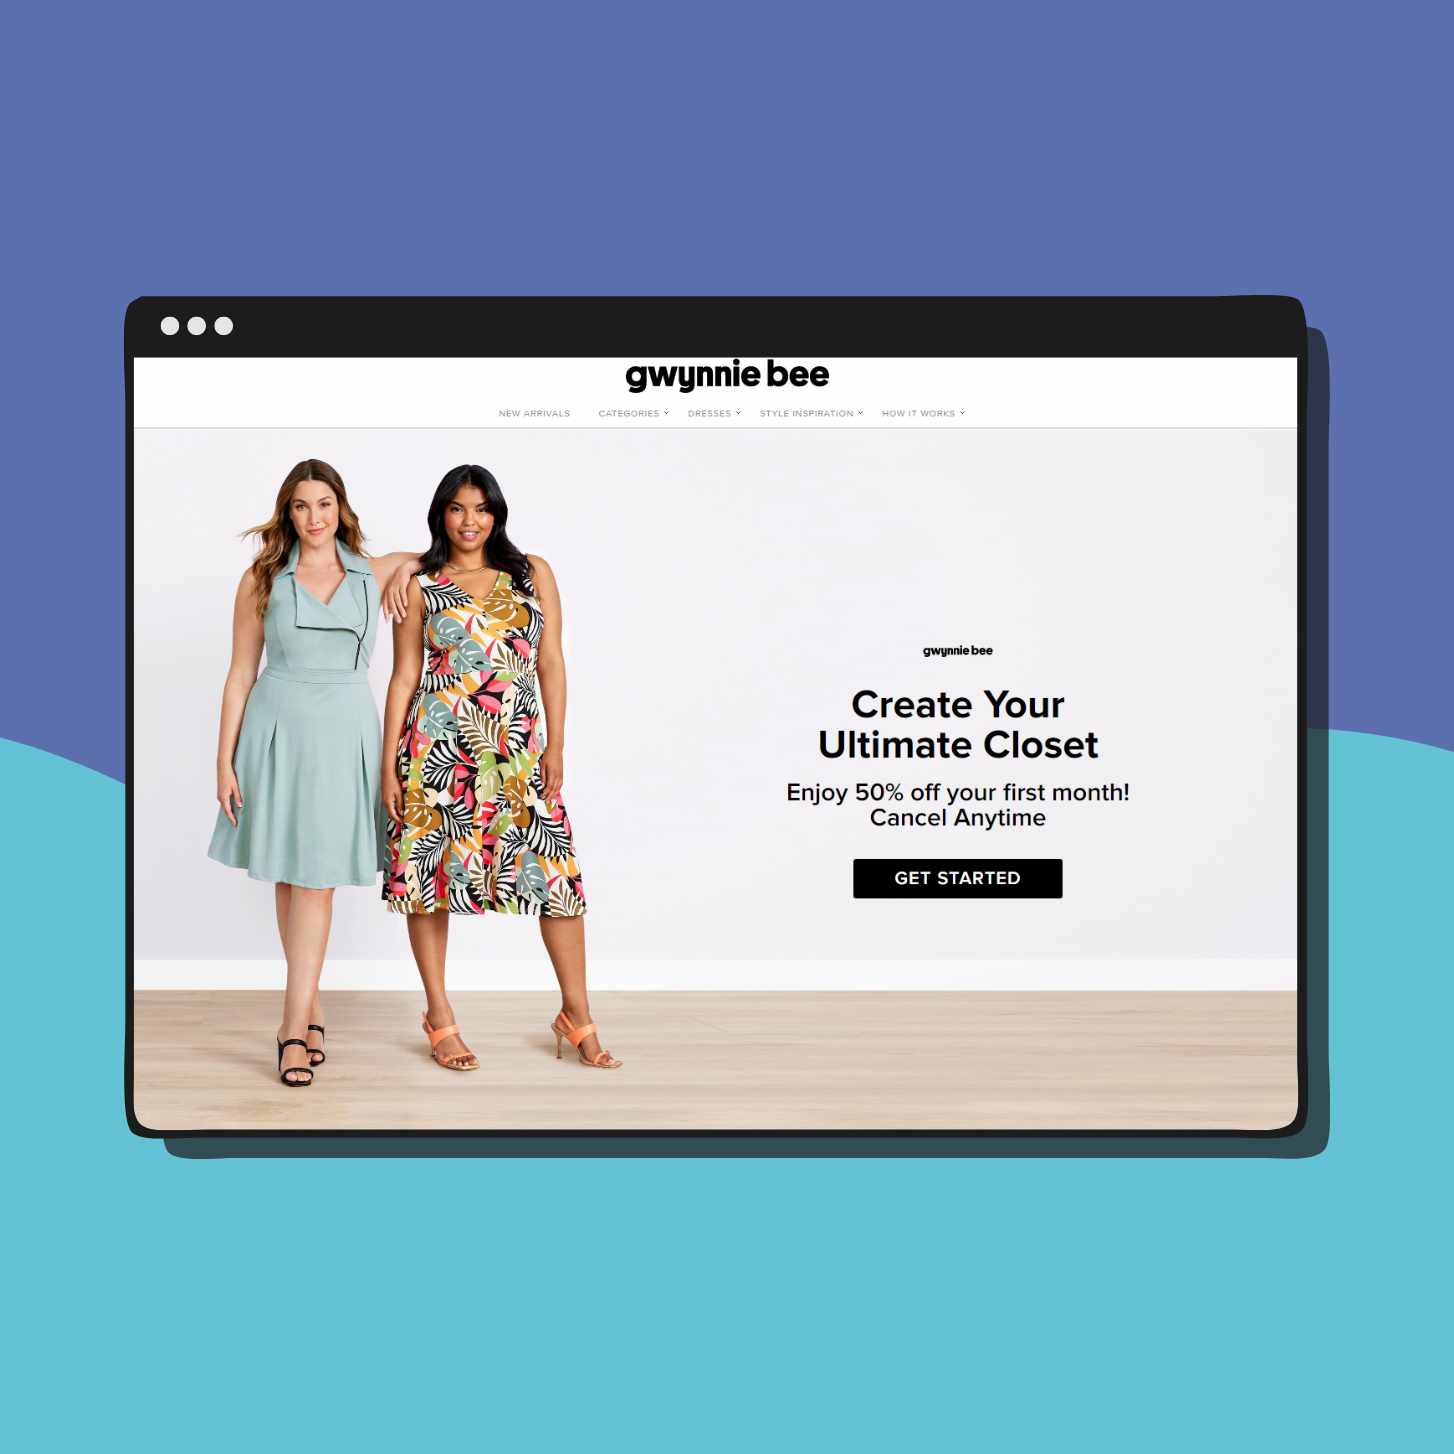 Gwyniie Bee's Website Showcasing Two People Wearing Dresses. The Person On The Left Is Wearing a Teal Dress And The Person On The Right A Tropical Dress